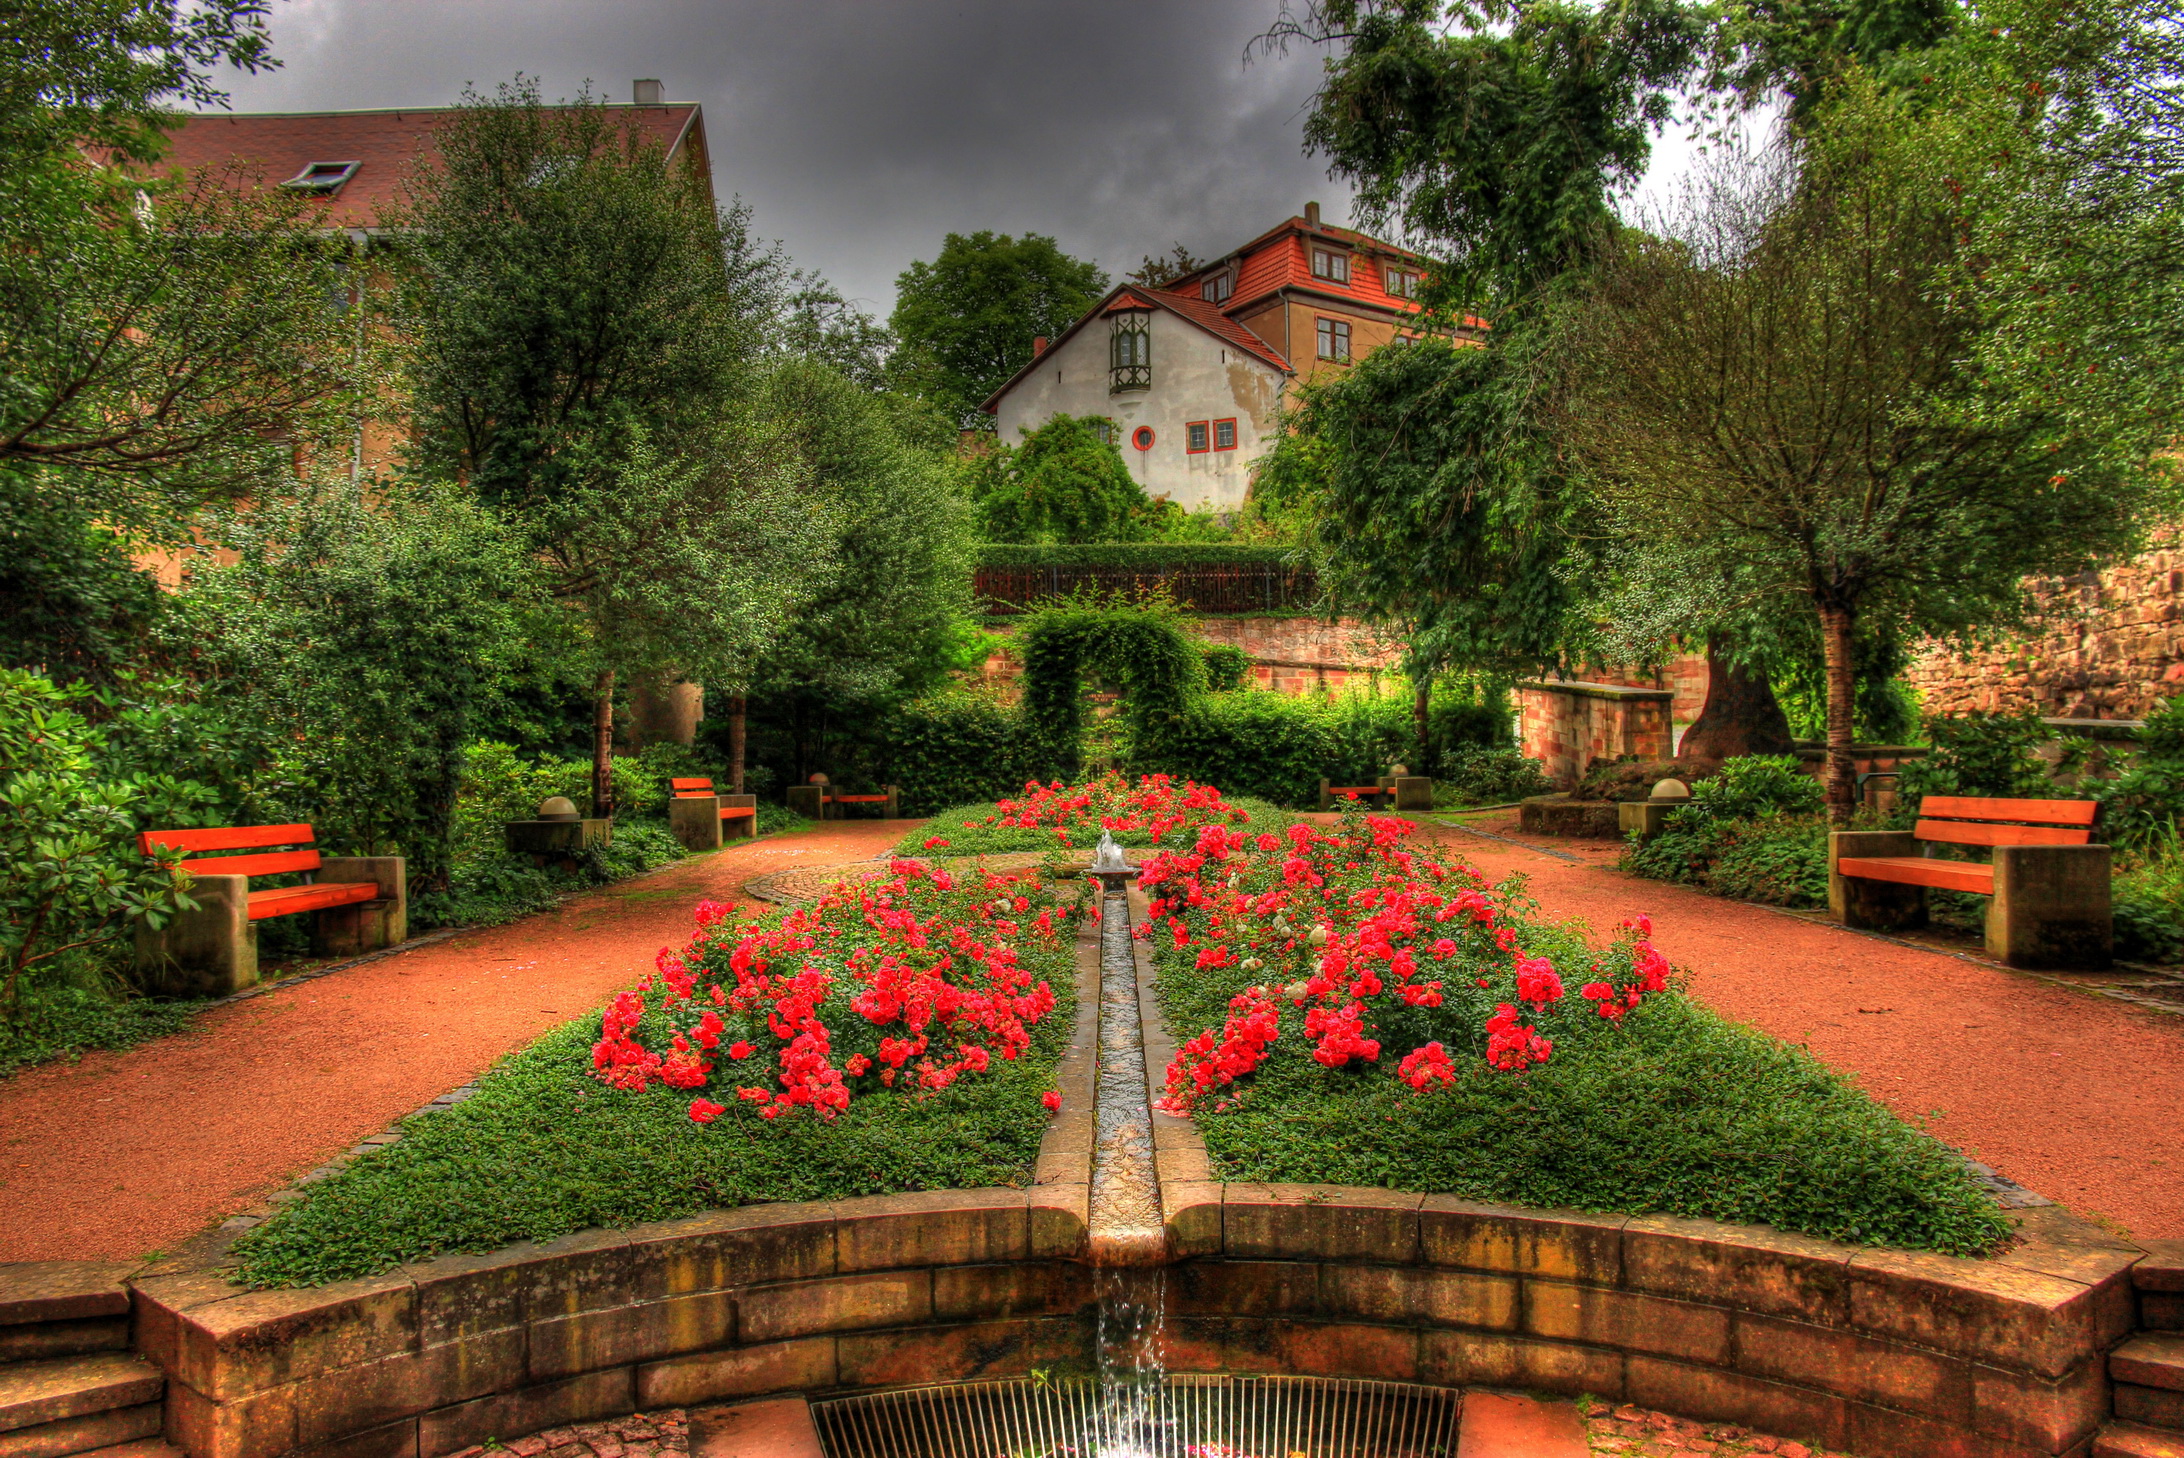 Man Made House Garden Flower Tree Courtyard Bench Colors Colorful HDR 2184x1458